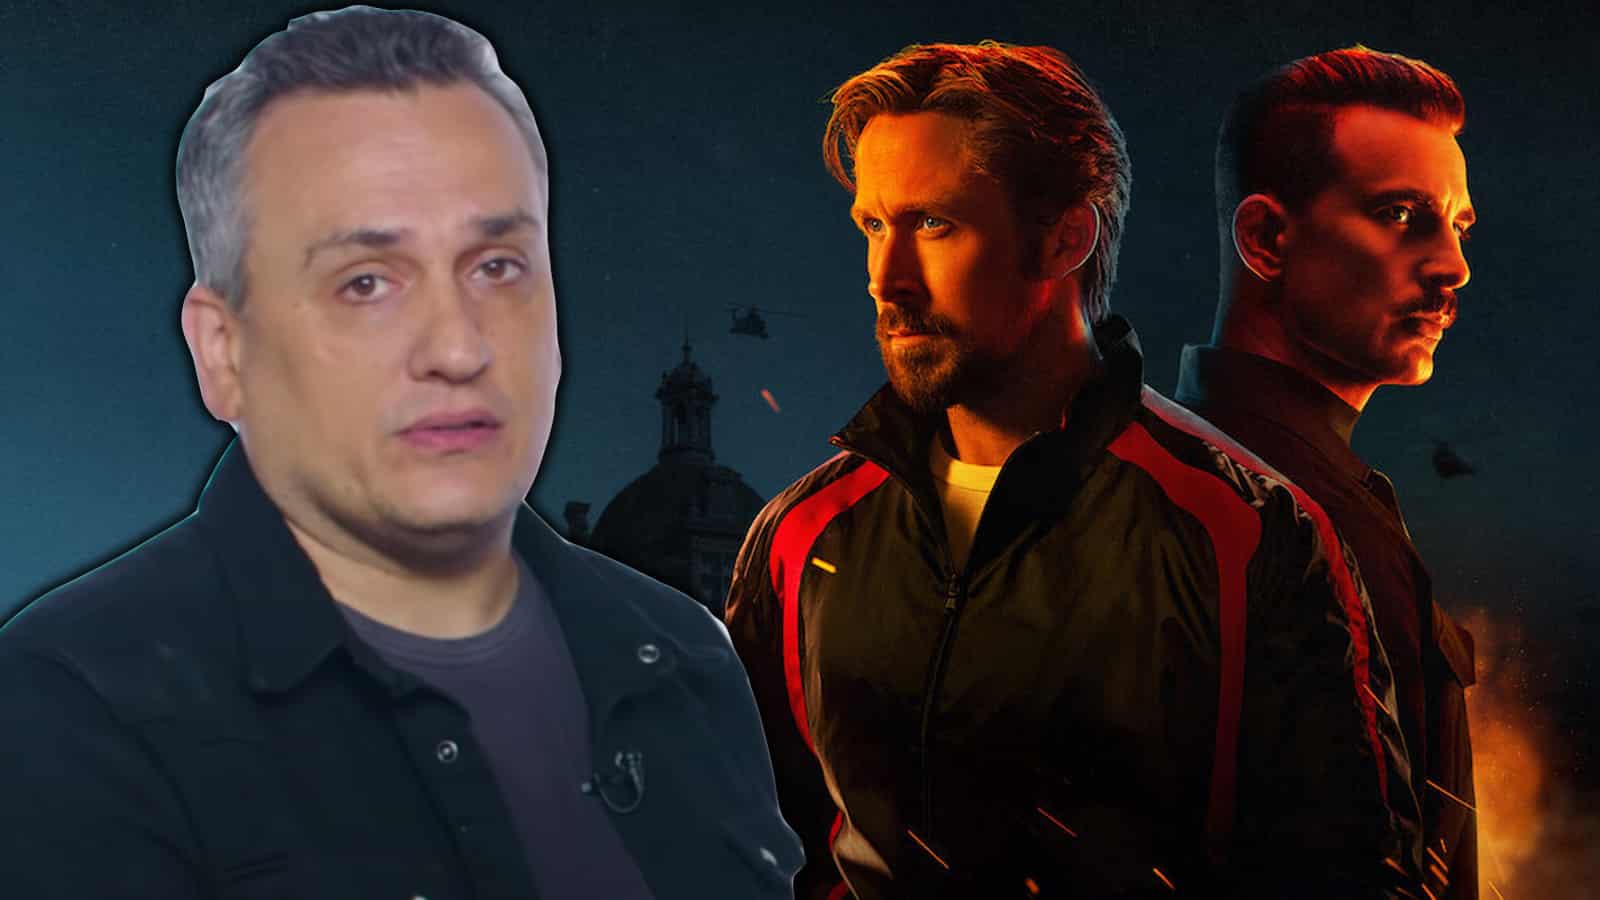 An image of Joe Russo promoting The Gray Man for Netflix